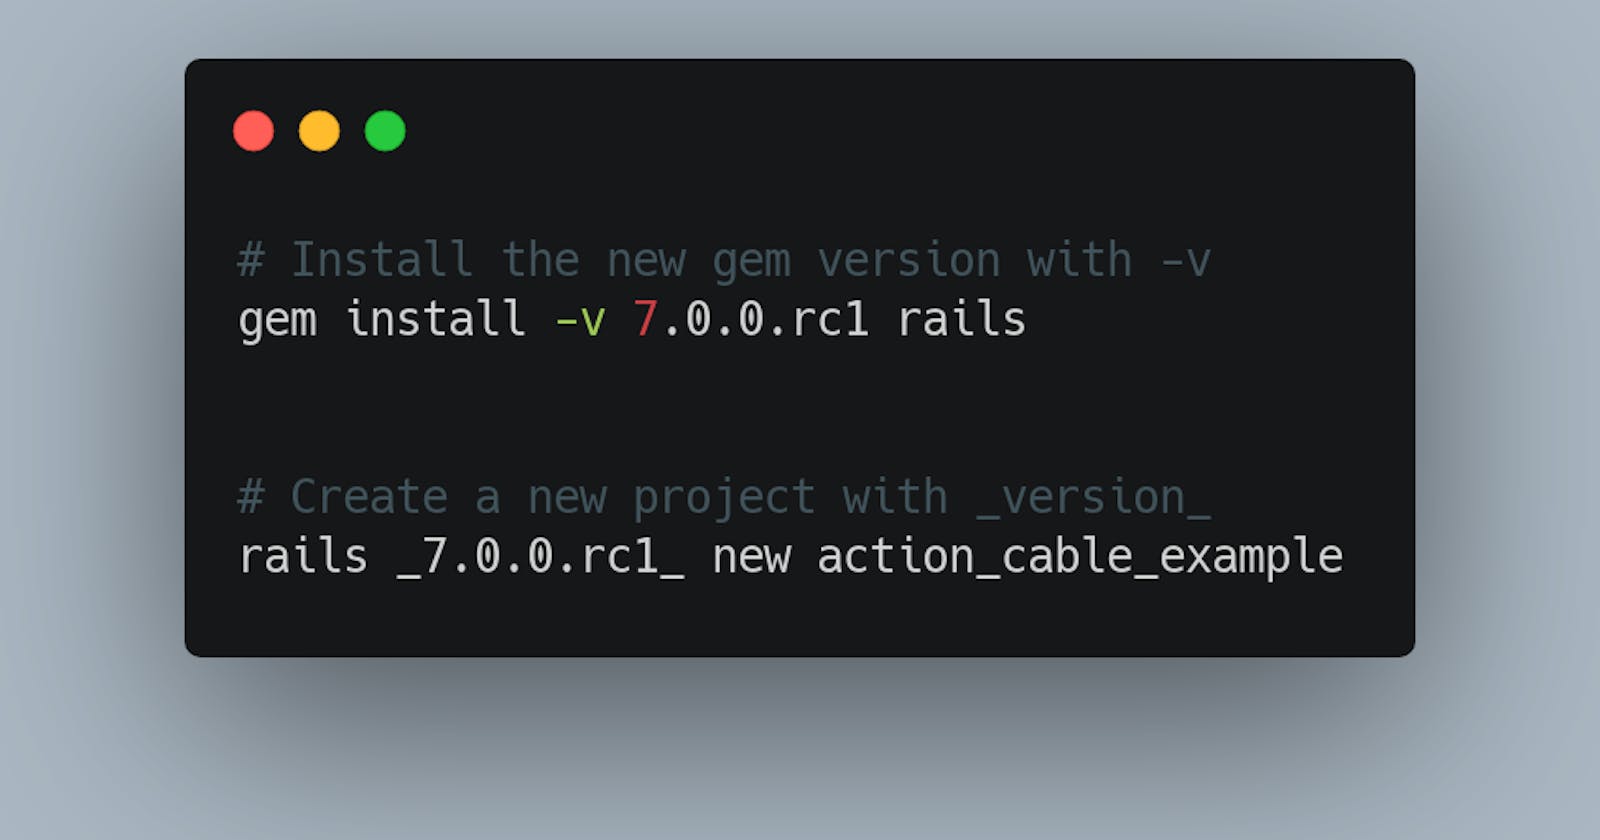 How to create a new project with Rails 7.0.0.rc1